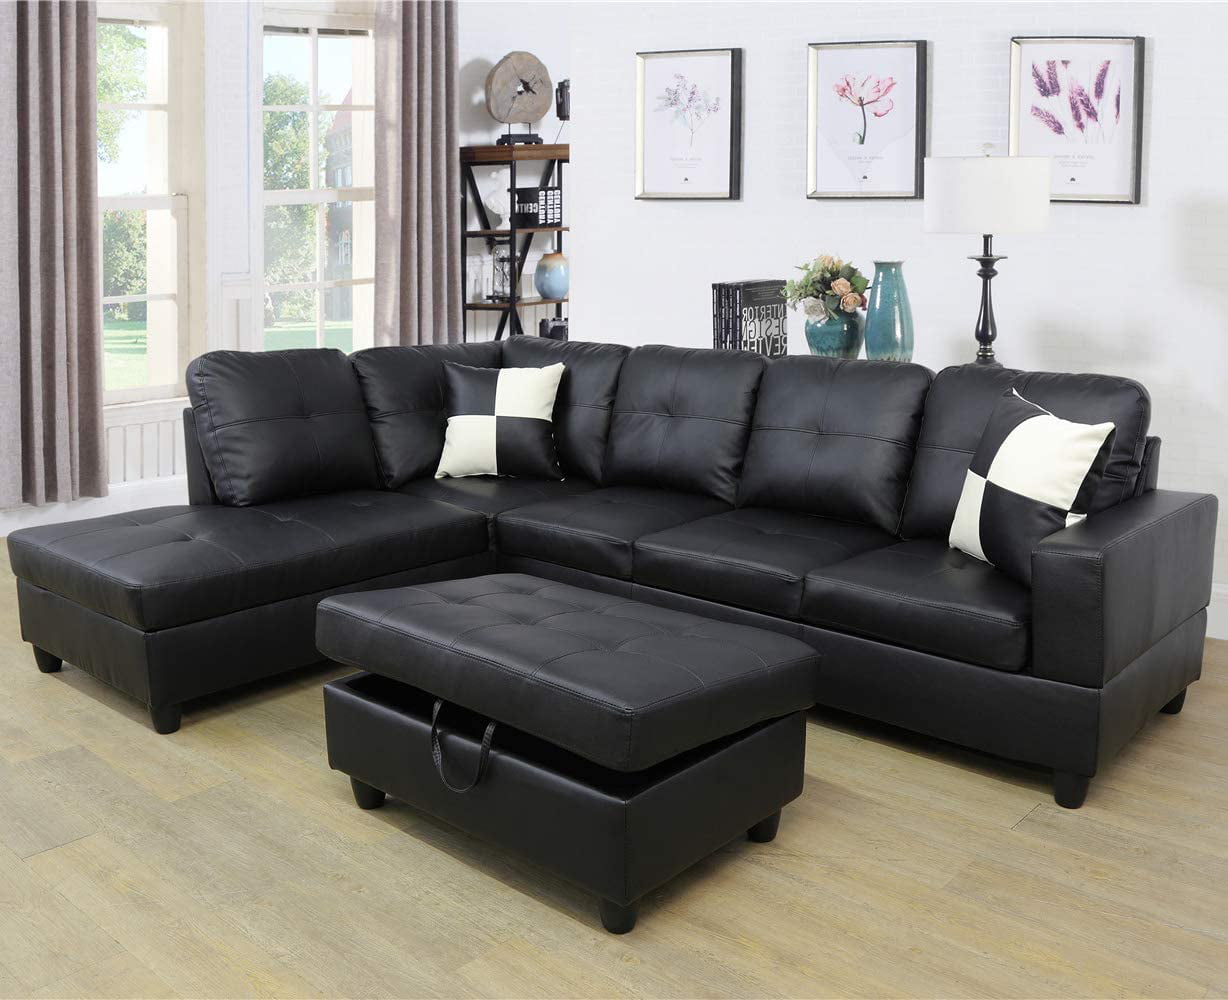 Ilario Leather Sectional Living Room Furniture Collection